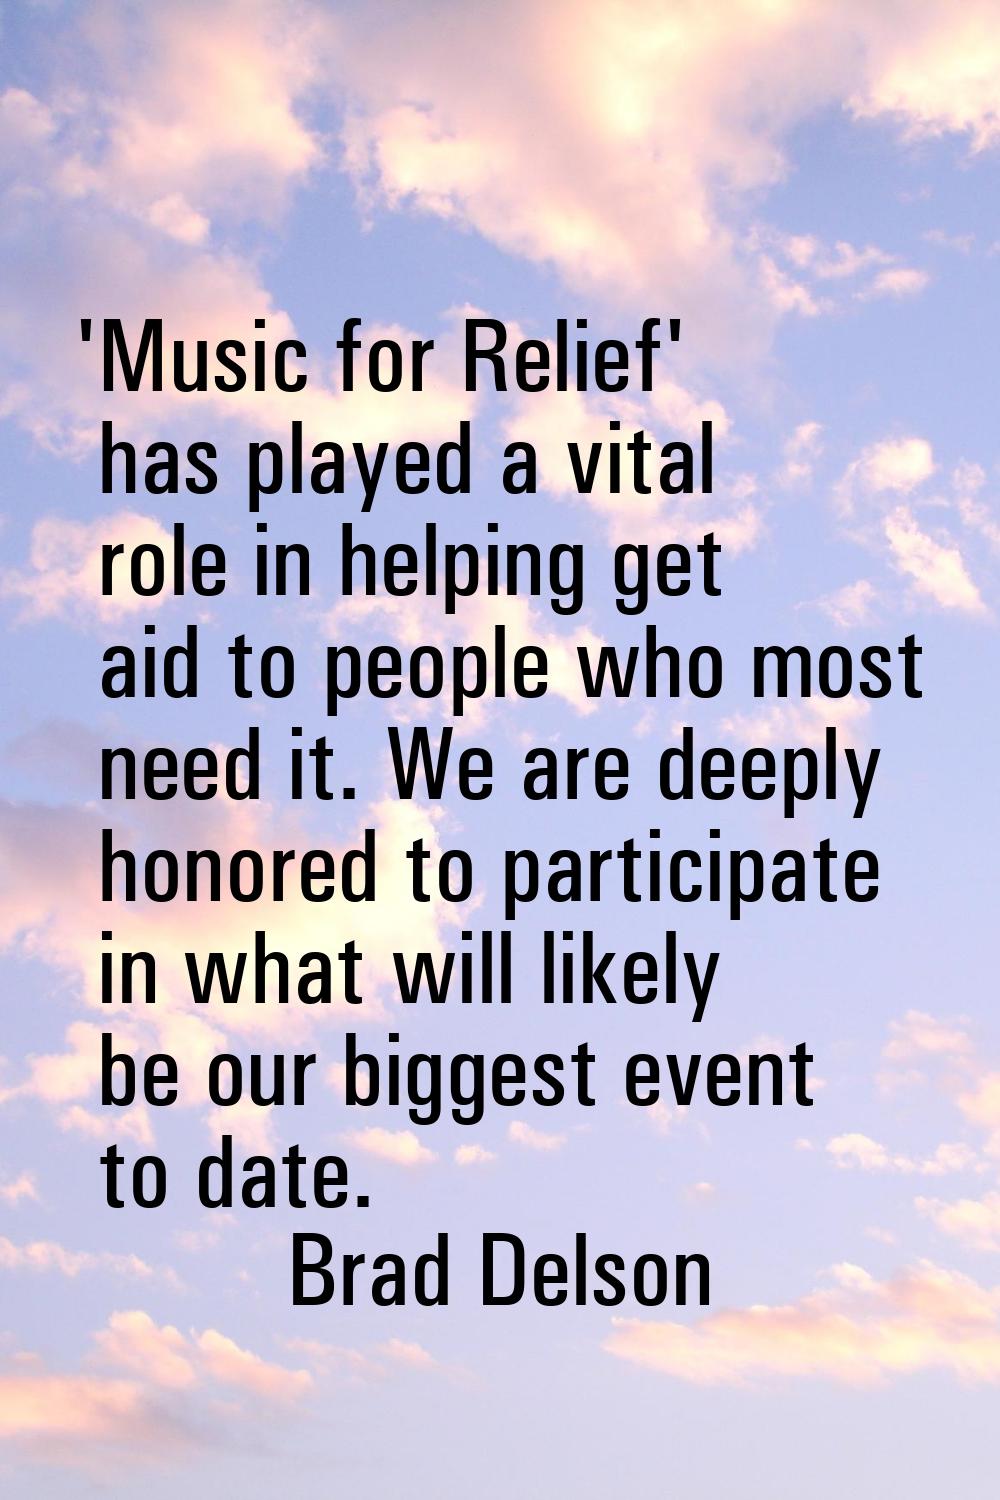 'Music for Relief' has played a vital role in helping get aid to people who most need it. We are de